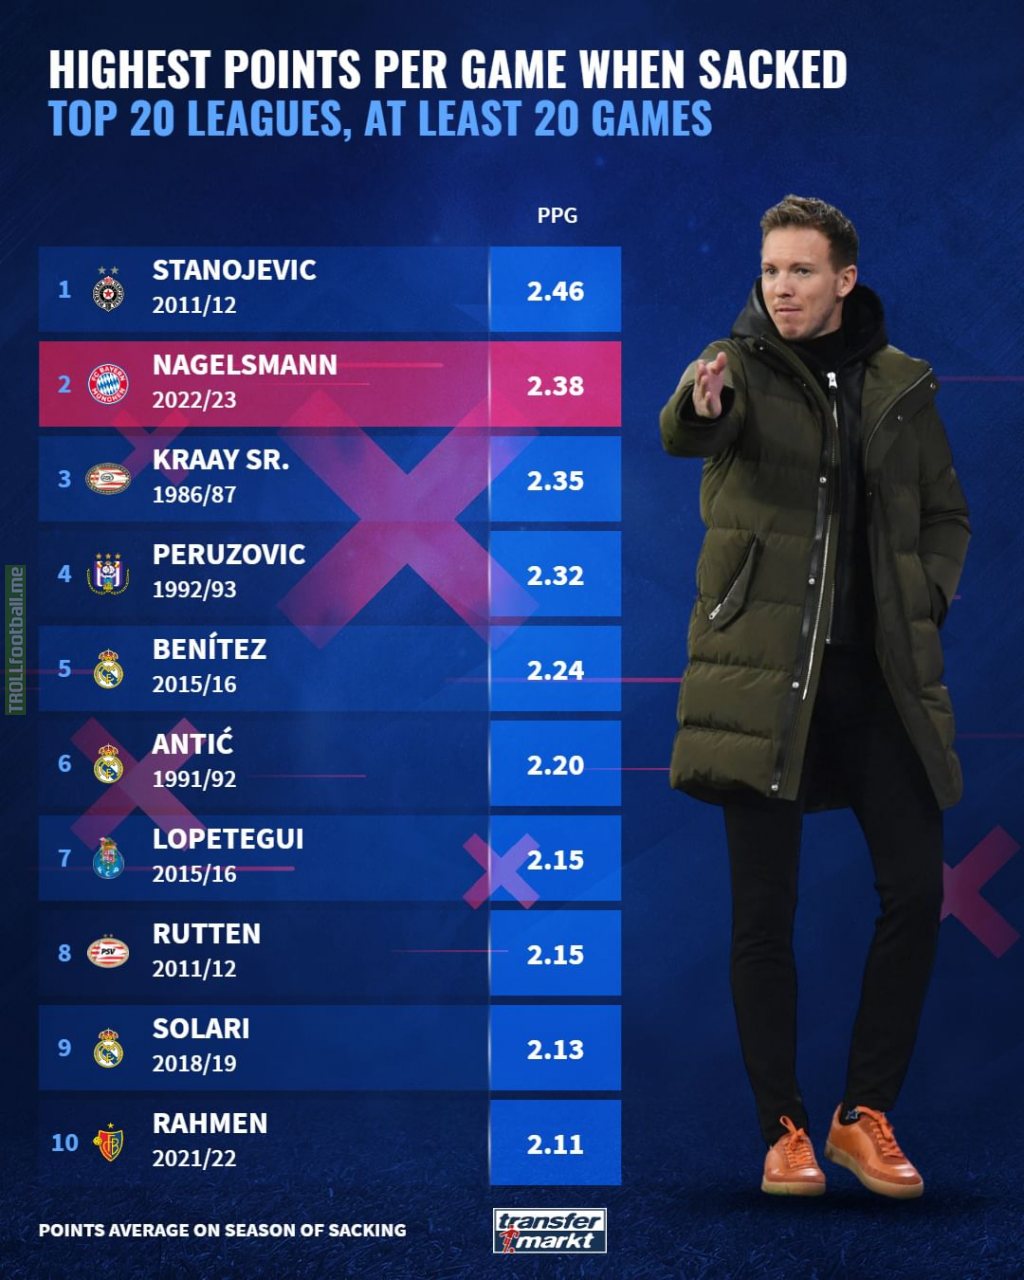 [Transfermarkt] Highest points per game when sacked in the top 20 leagues (only coaches with 20+ games)